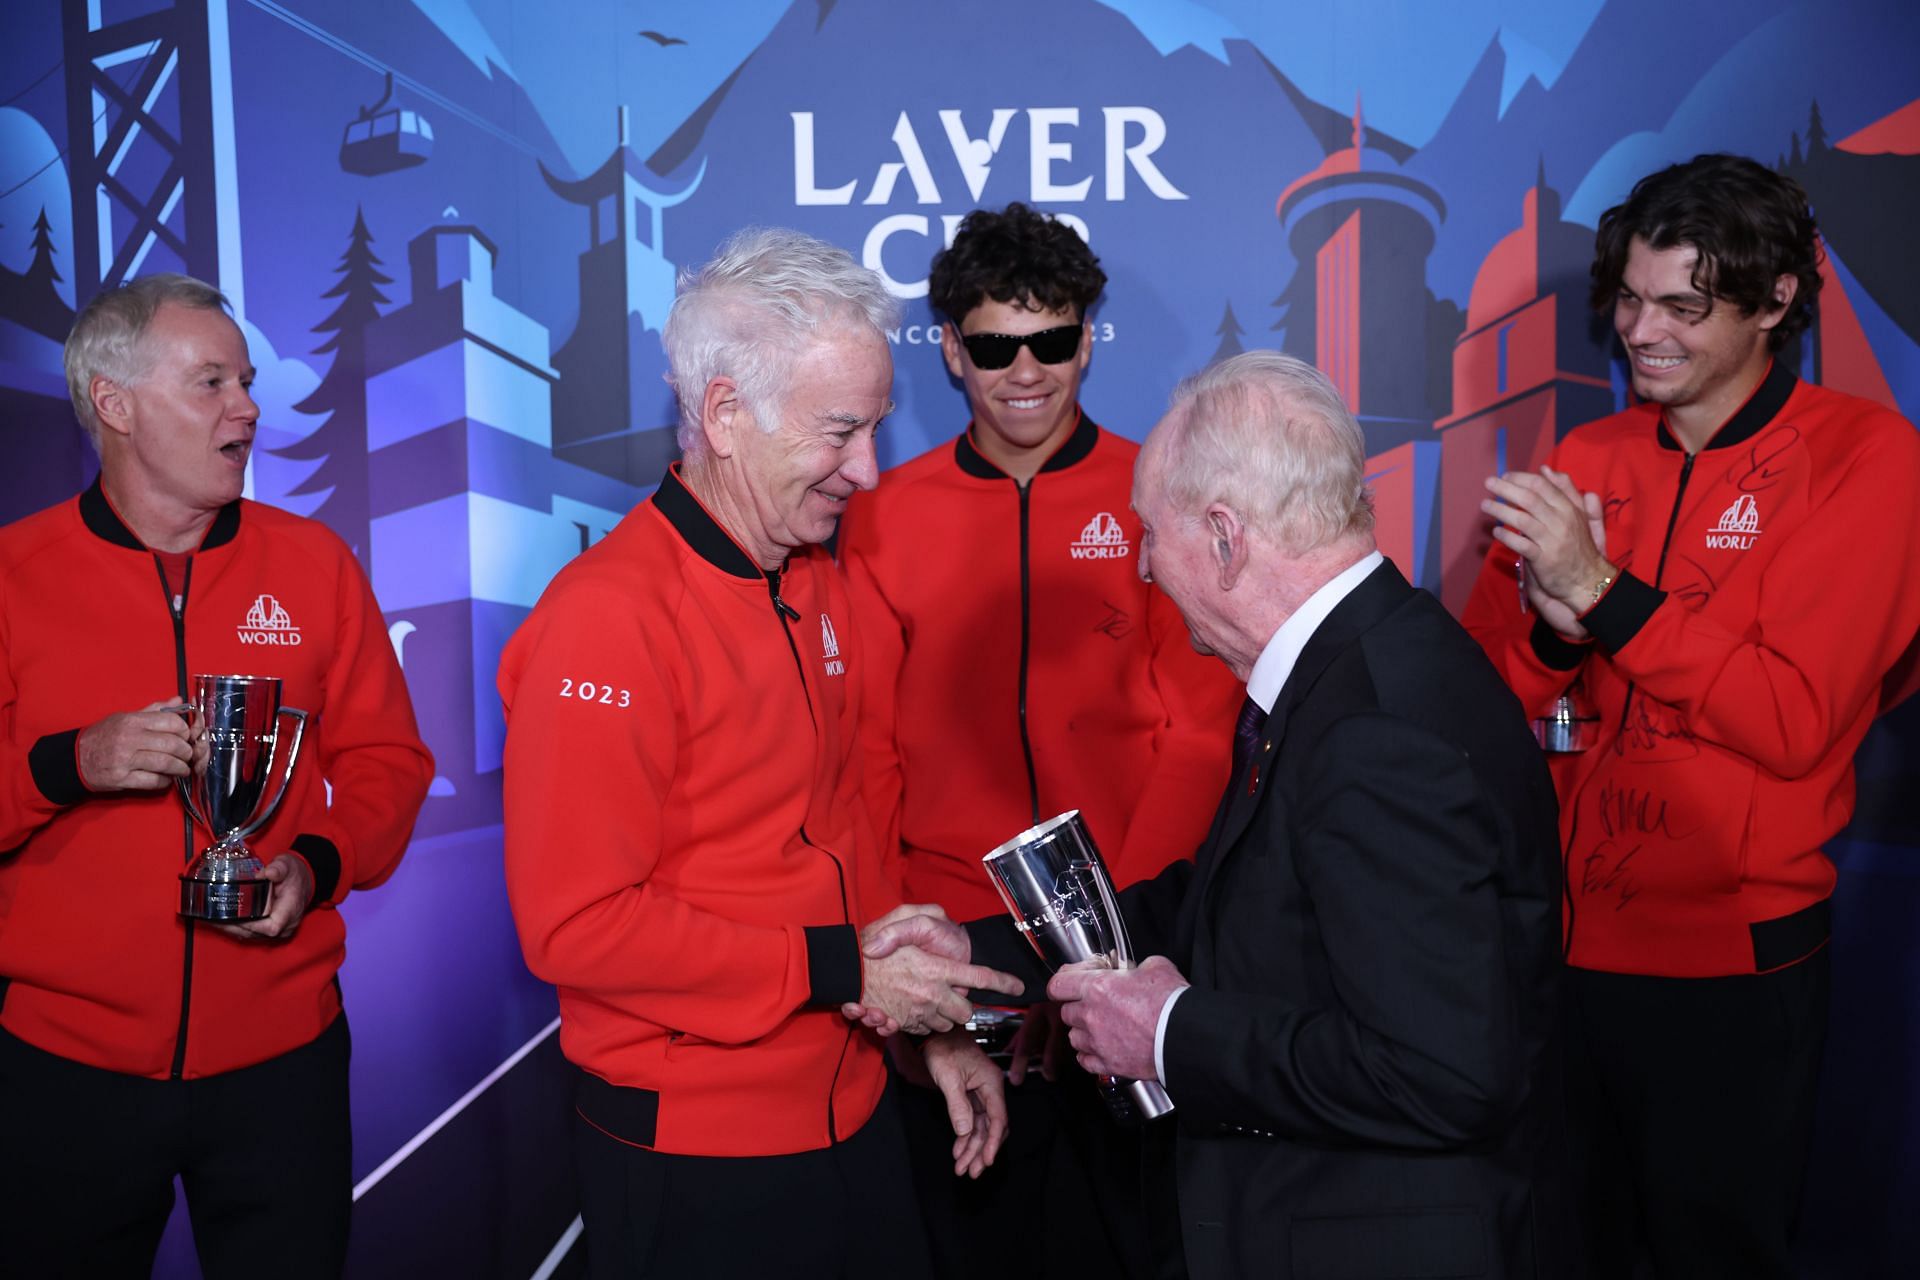 John McEnroe and the Team World players with Rod Laver